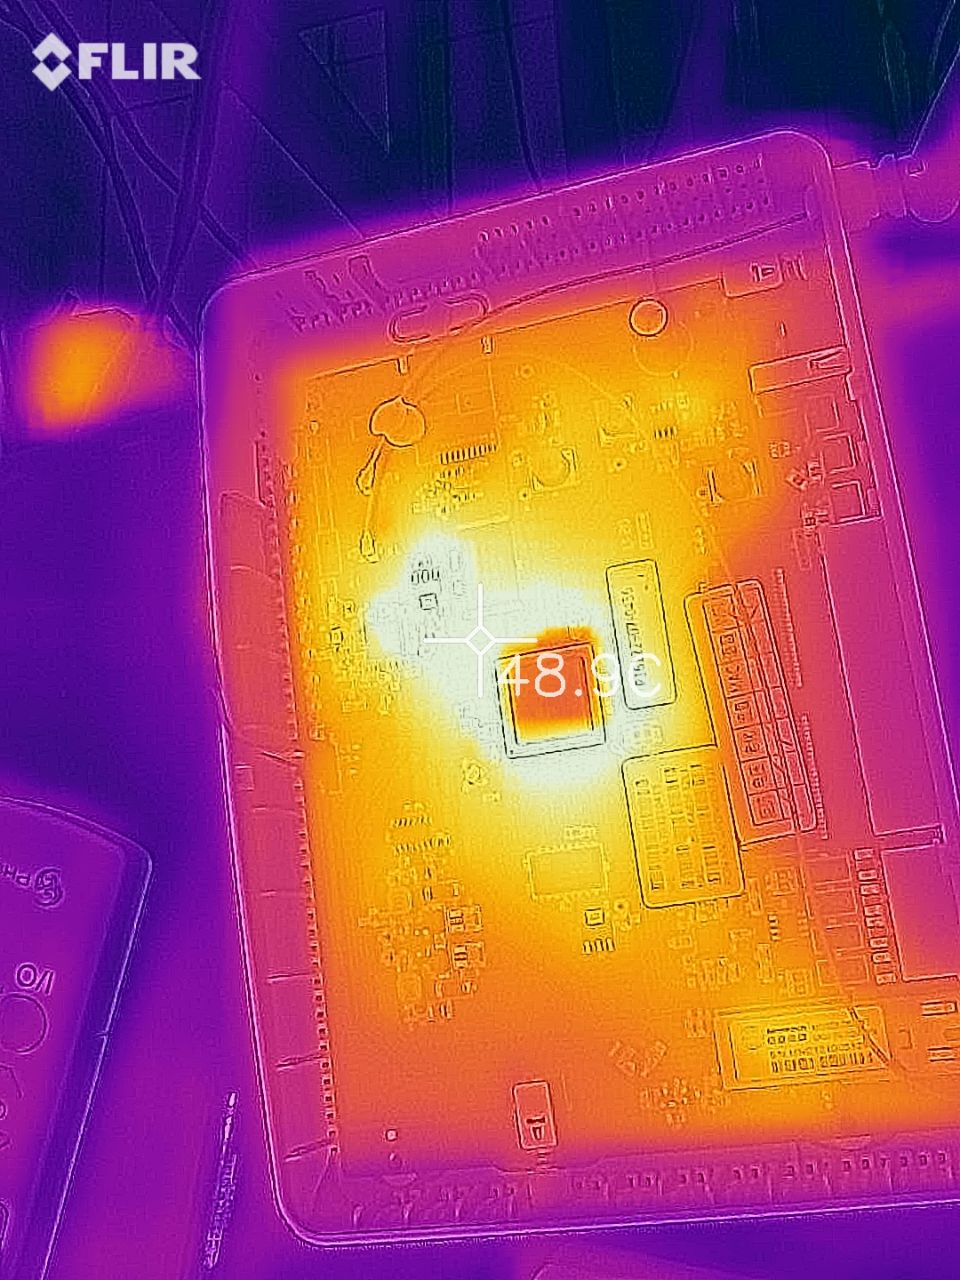 Thermal view (in)